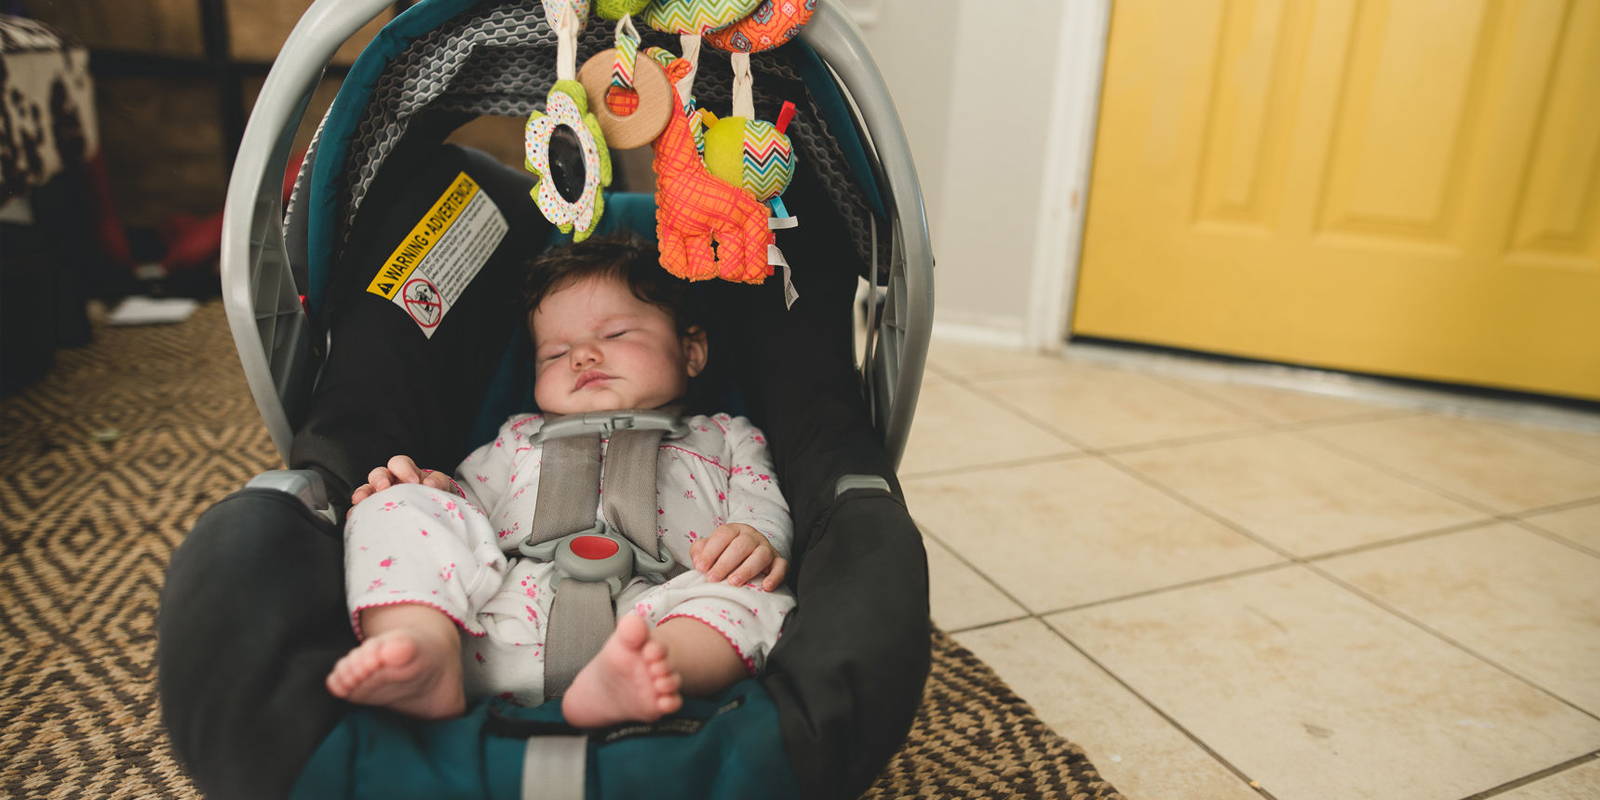 Sleeping baby in a carseat